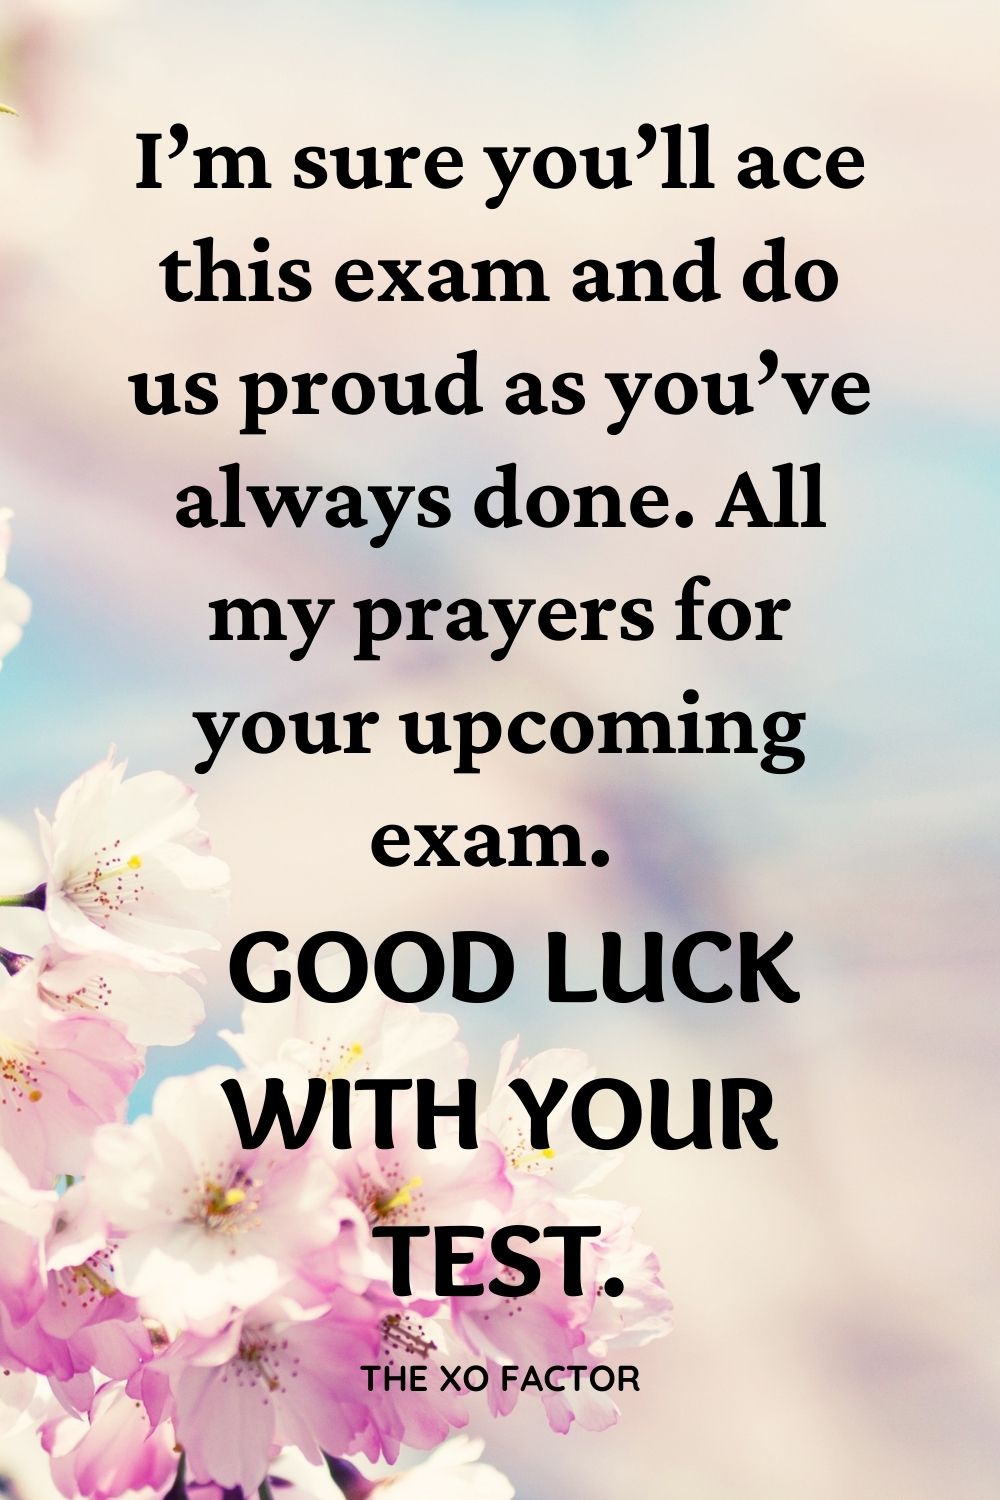 I’m sure you’ll ace this exam and do us proud as you’ve always done. All my prayers for your upcoming exam. Good luck with your test.